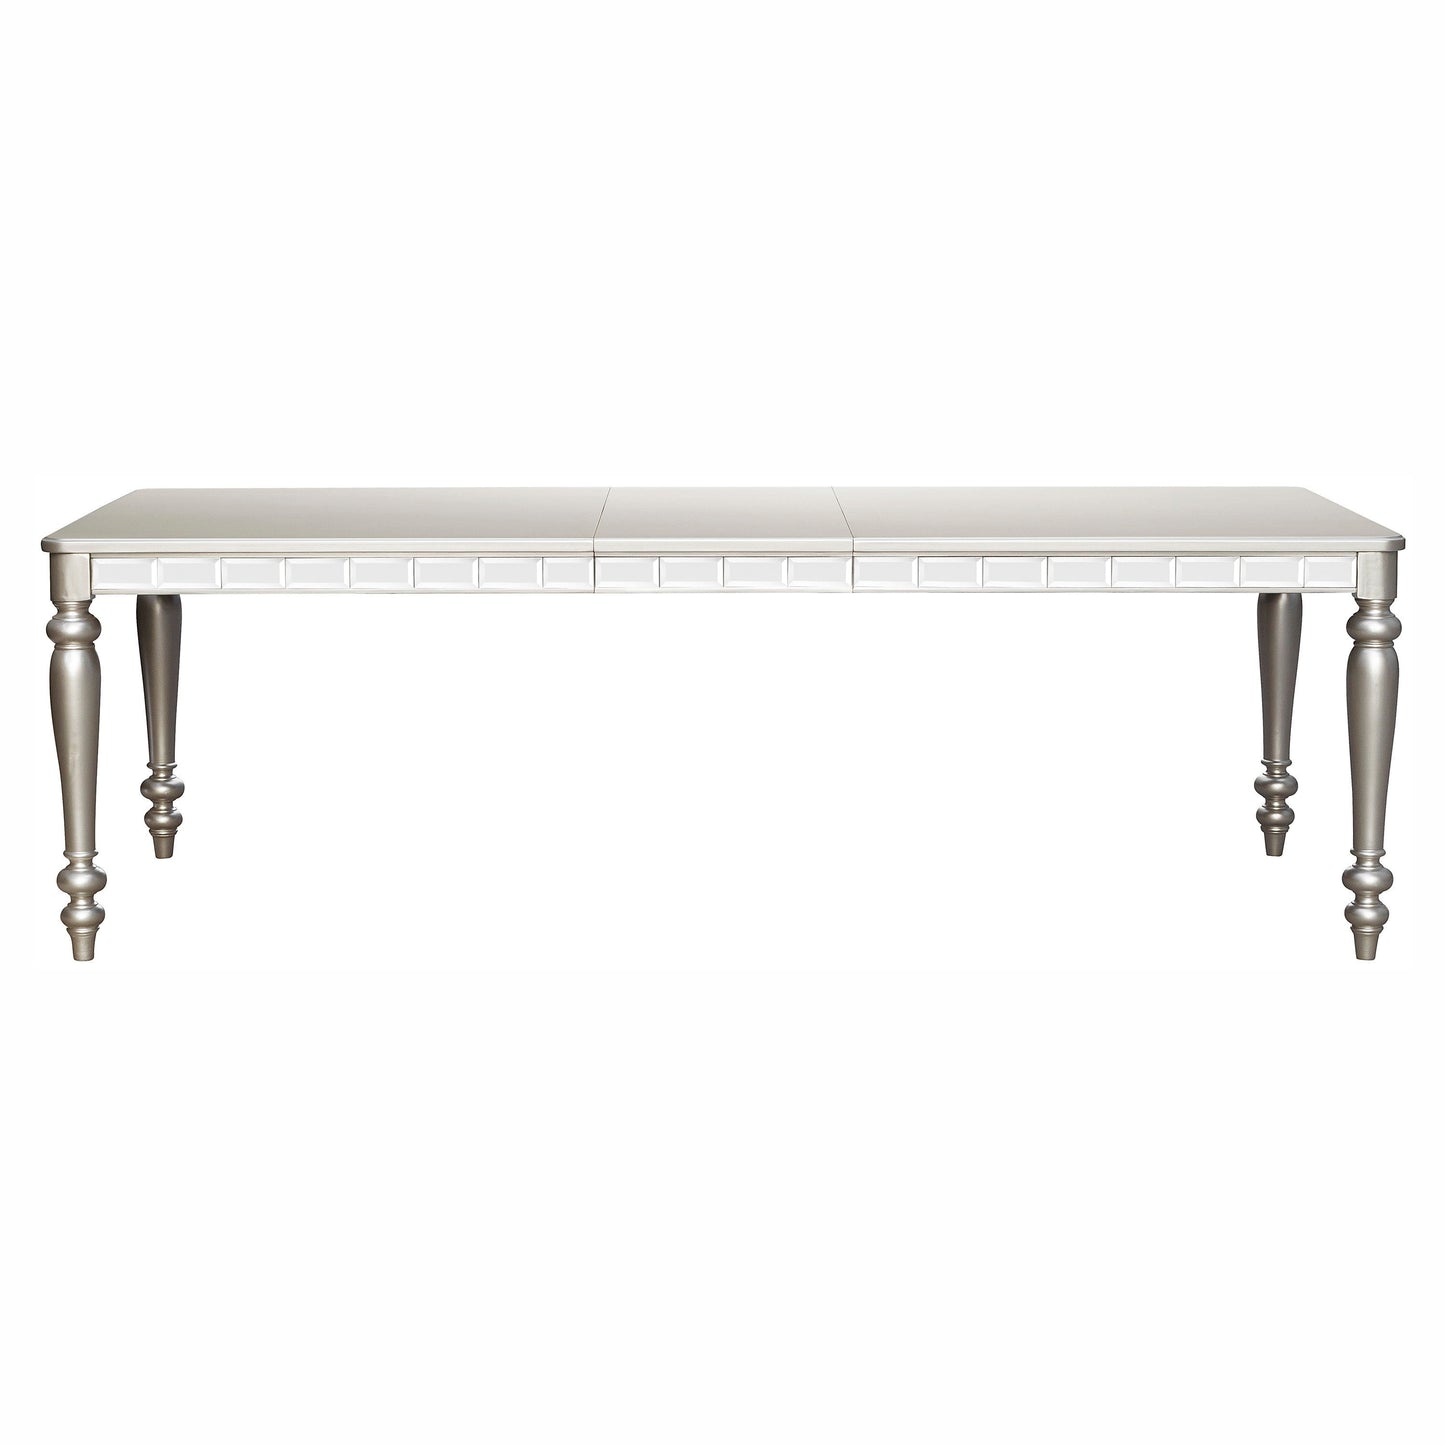 Orsina Silver Mirrored Extendable Dining Table